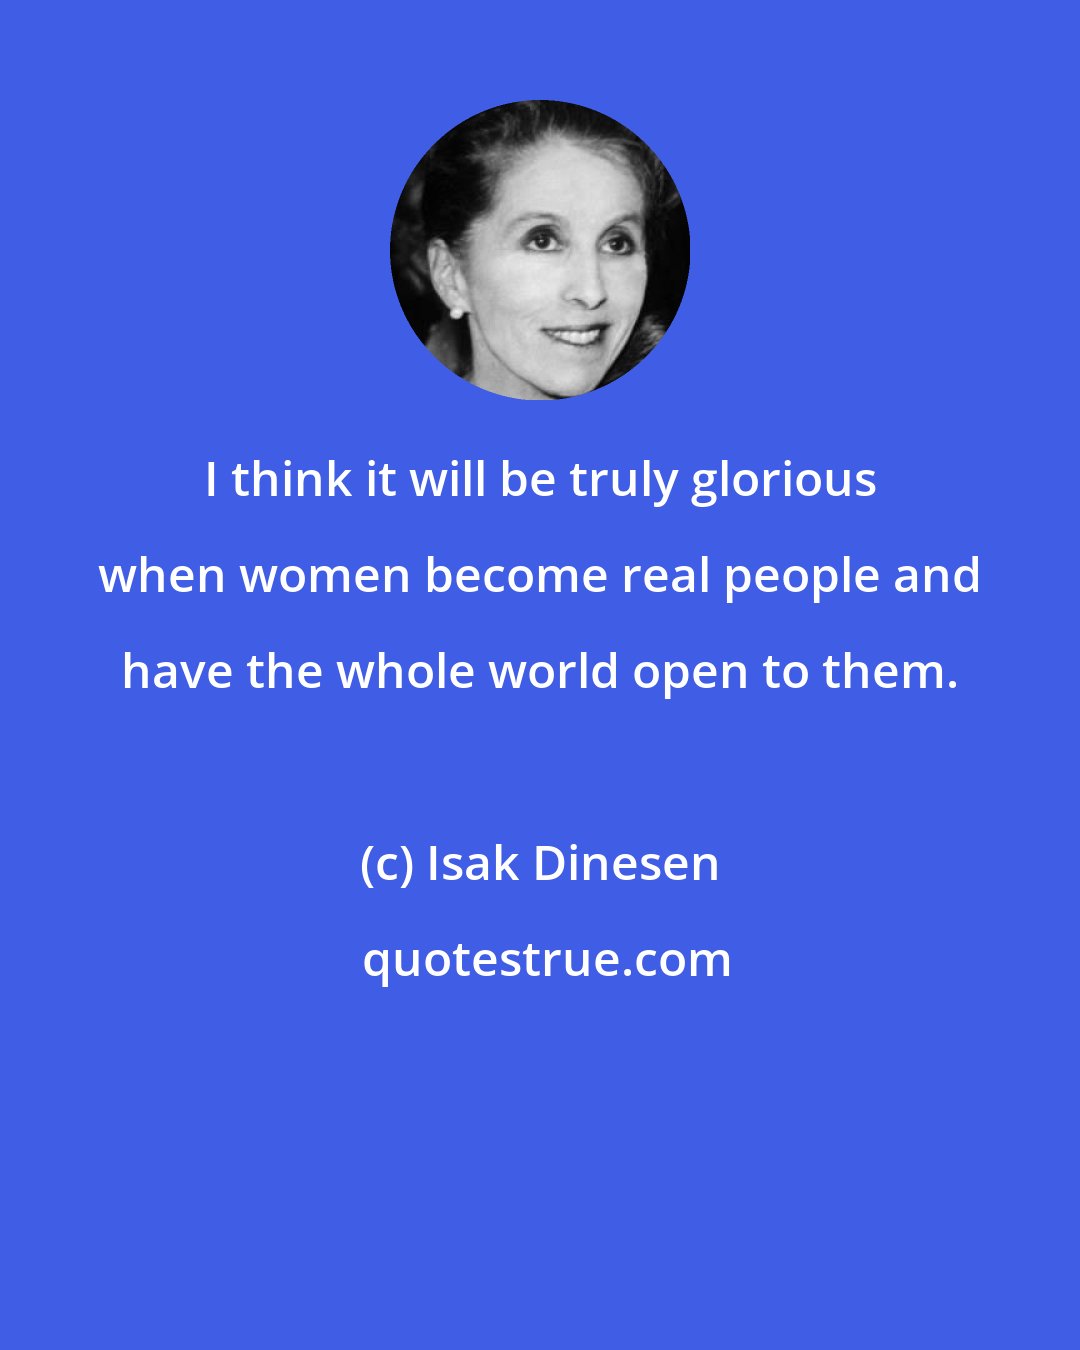 Isak Dinesen: I think it will be truly glorious when women become real people and have the whole world open to them.